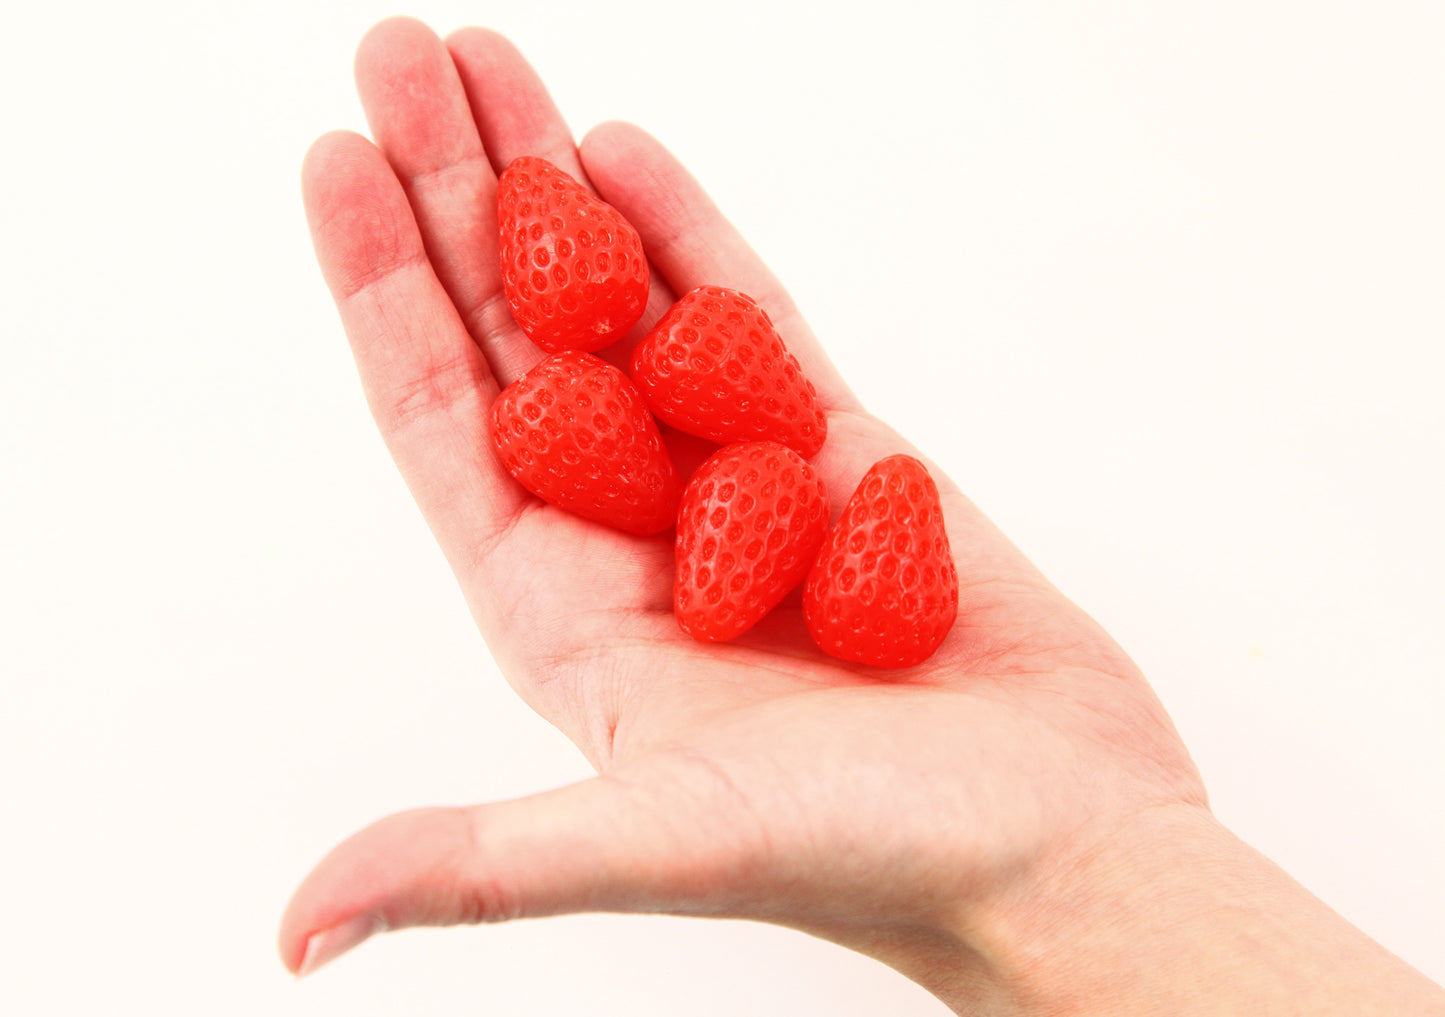 Fake Fruit - 30mm Big Fake Strawberries Soft Squishy Silicone Strawberry or Resin Cabochons - 4 pc set